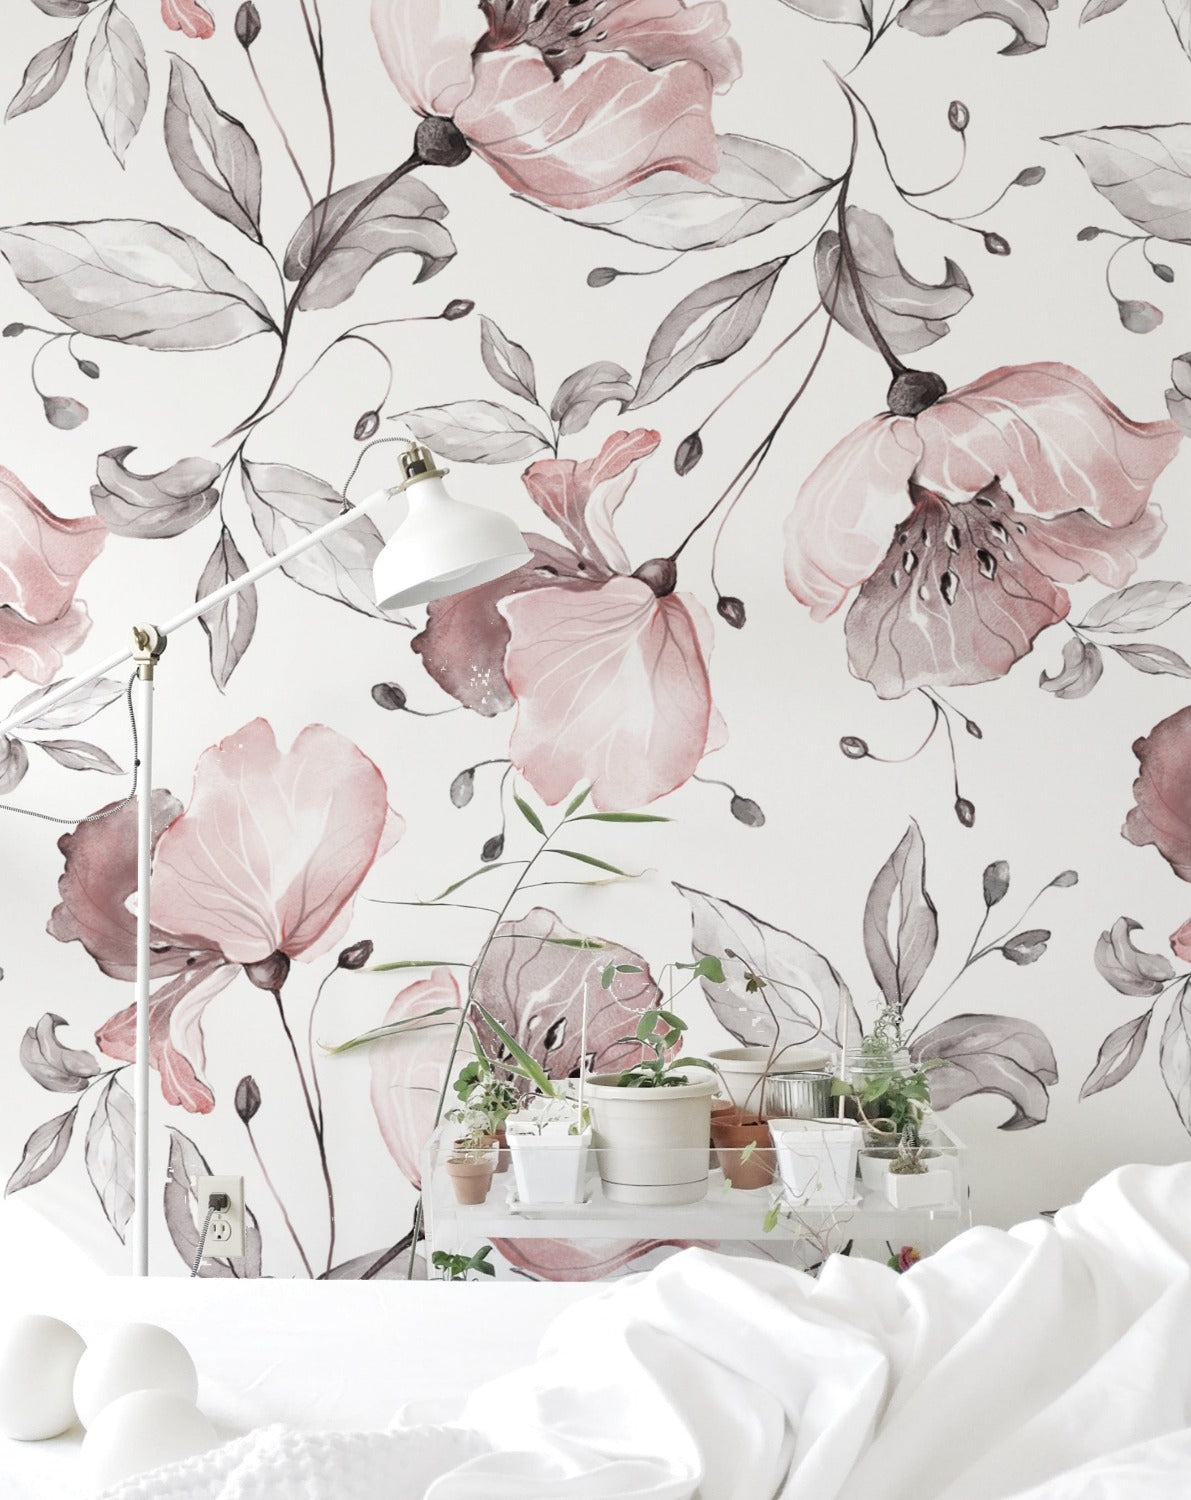 A cozy bedroom featuring Pink Watercolour Floral Wallpaper with delicate pink and grey watercolor flowers and leaves, creating a serene and elegant ambiance